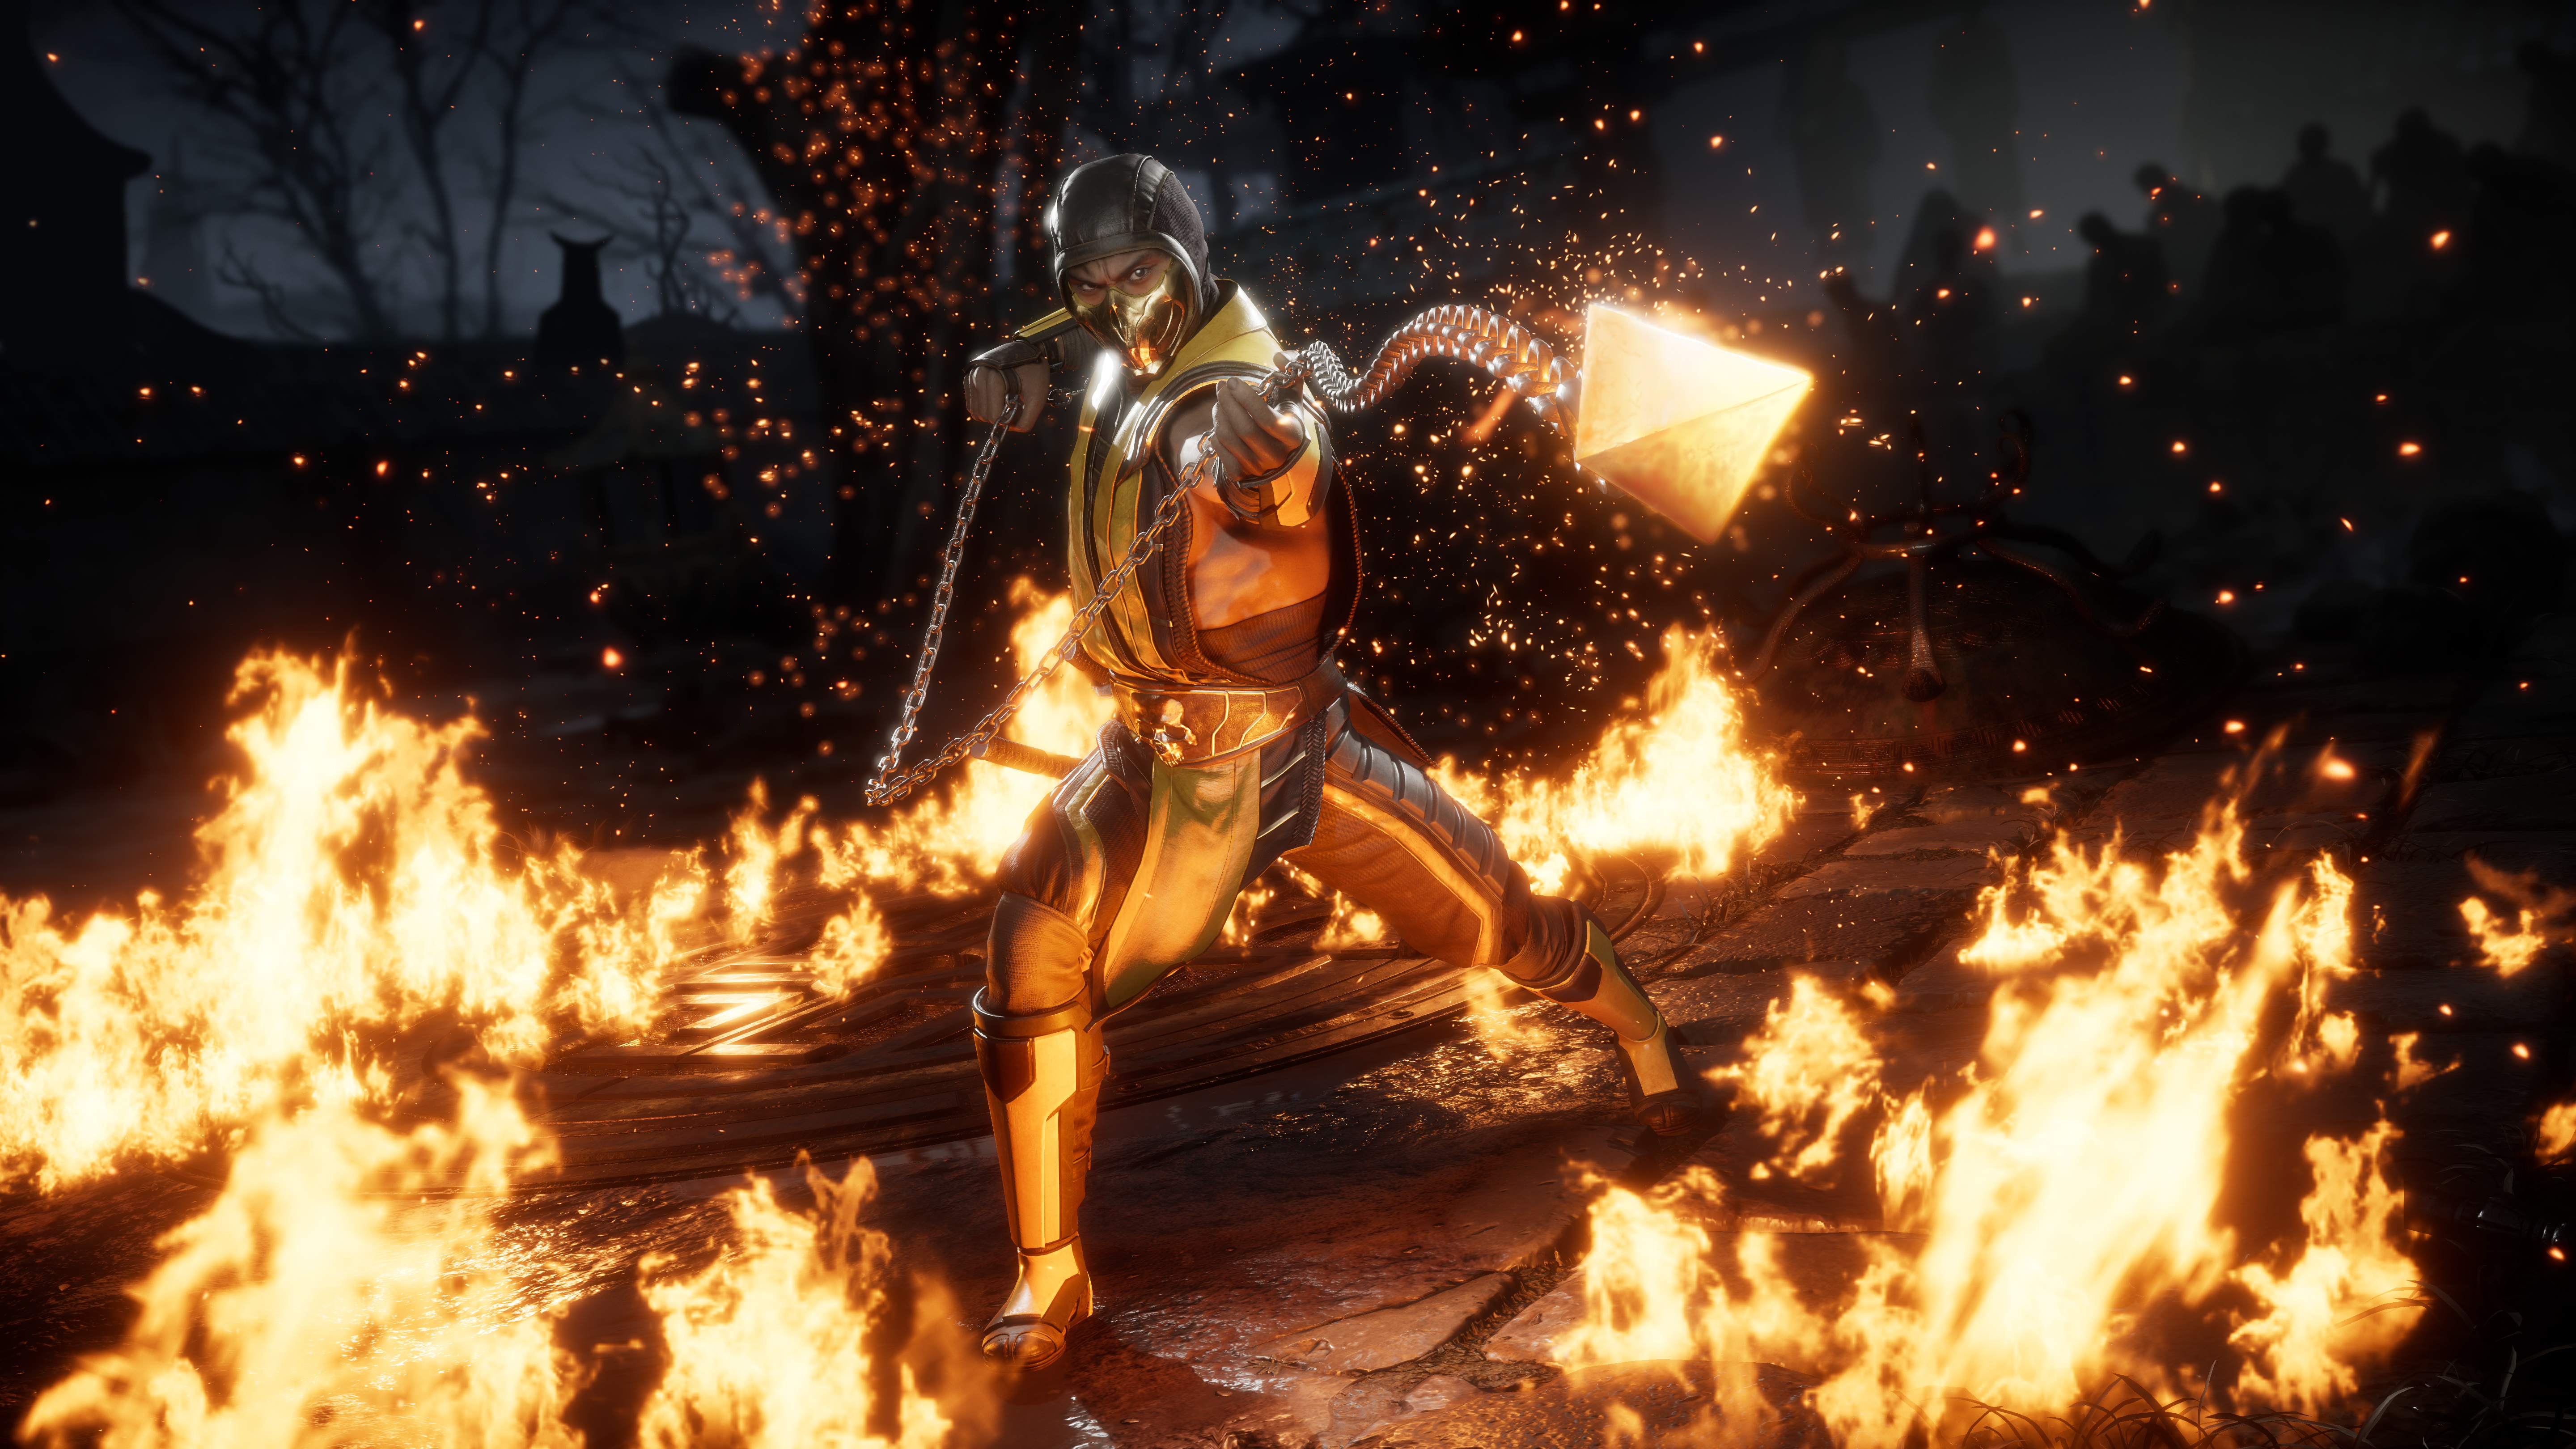 'Mortal Kombat 1' Will Be A Reboot According To Report